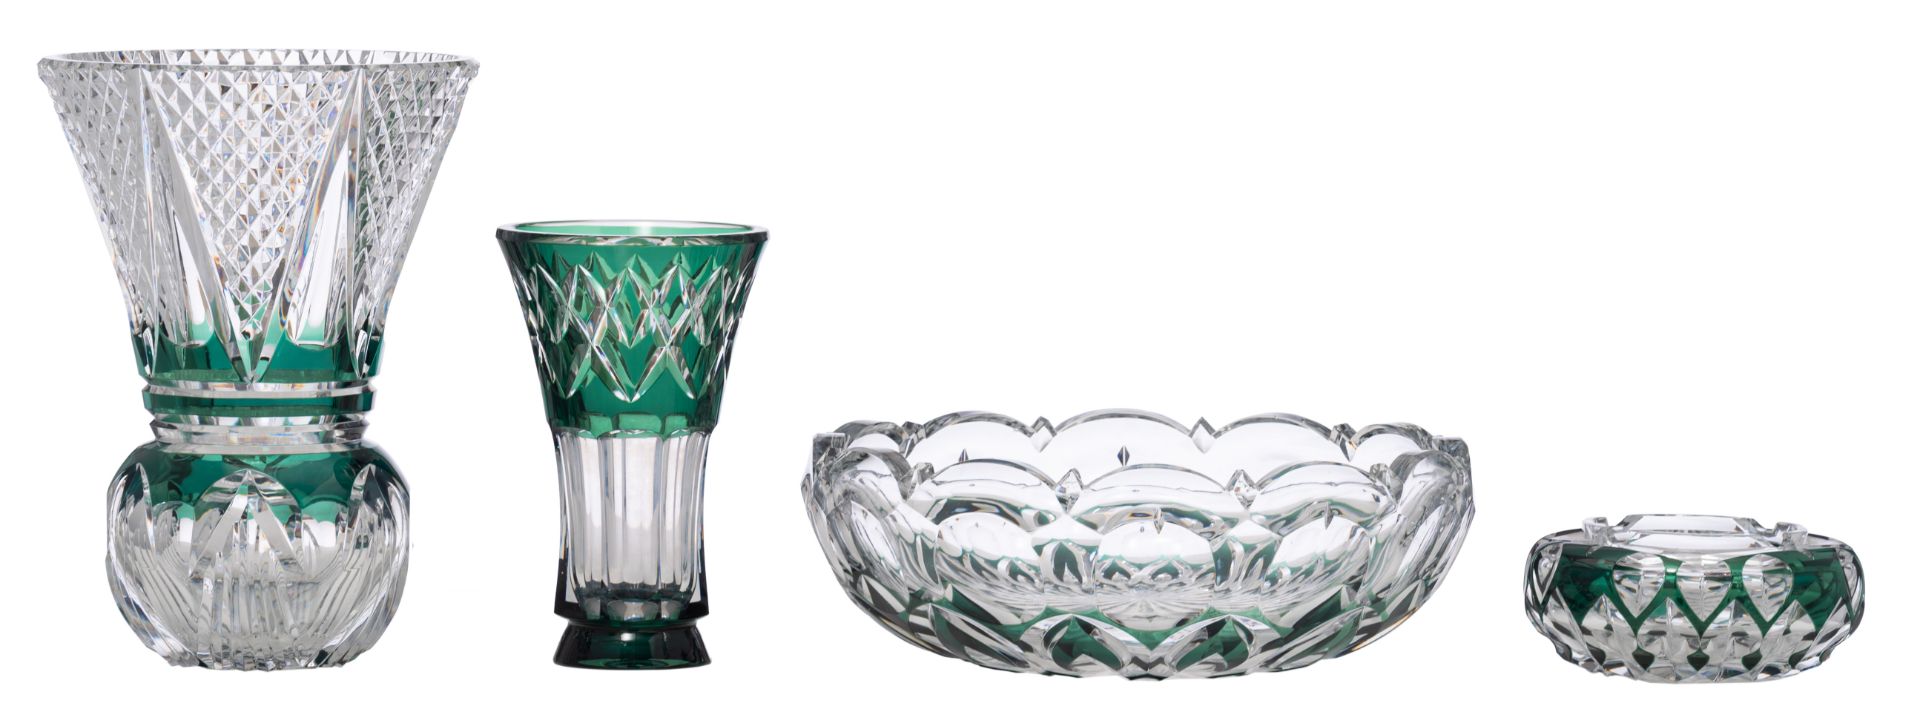 A various collection of Val-Saint-Lambert, with emerald green overlay, H 7 - 28 cm